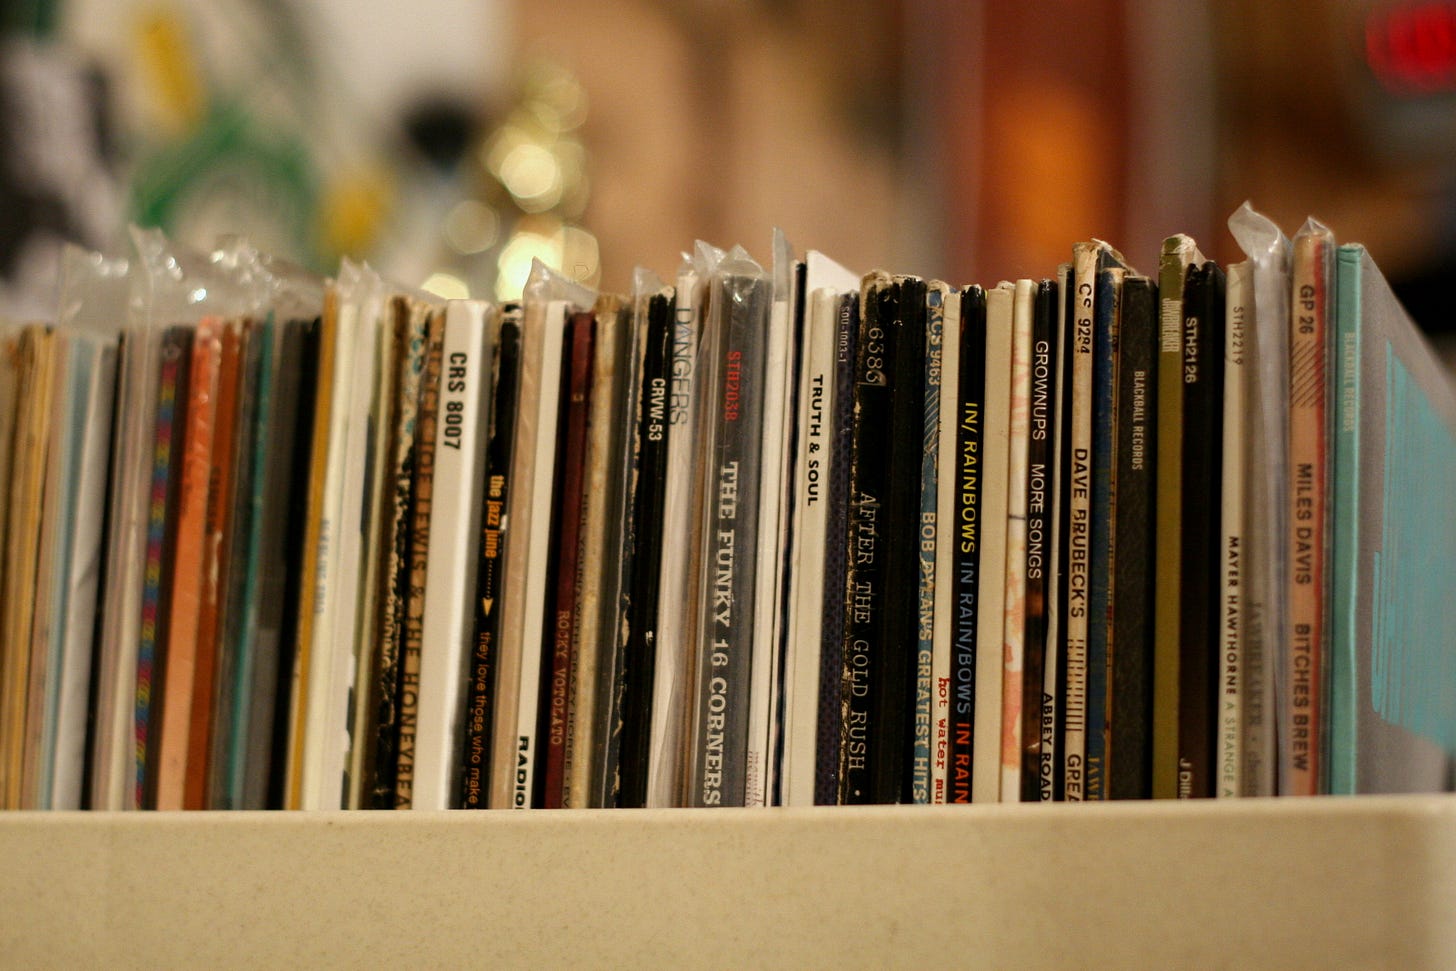 How to catalog your vinyl collection online - CNET